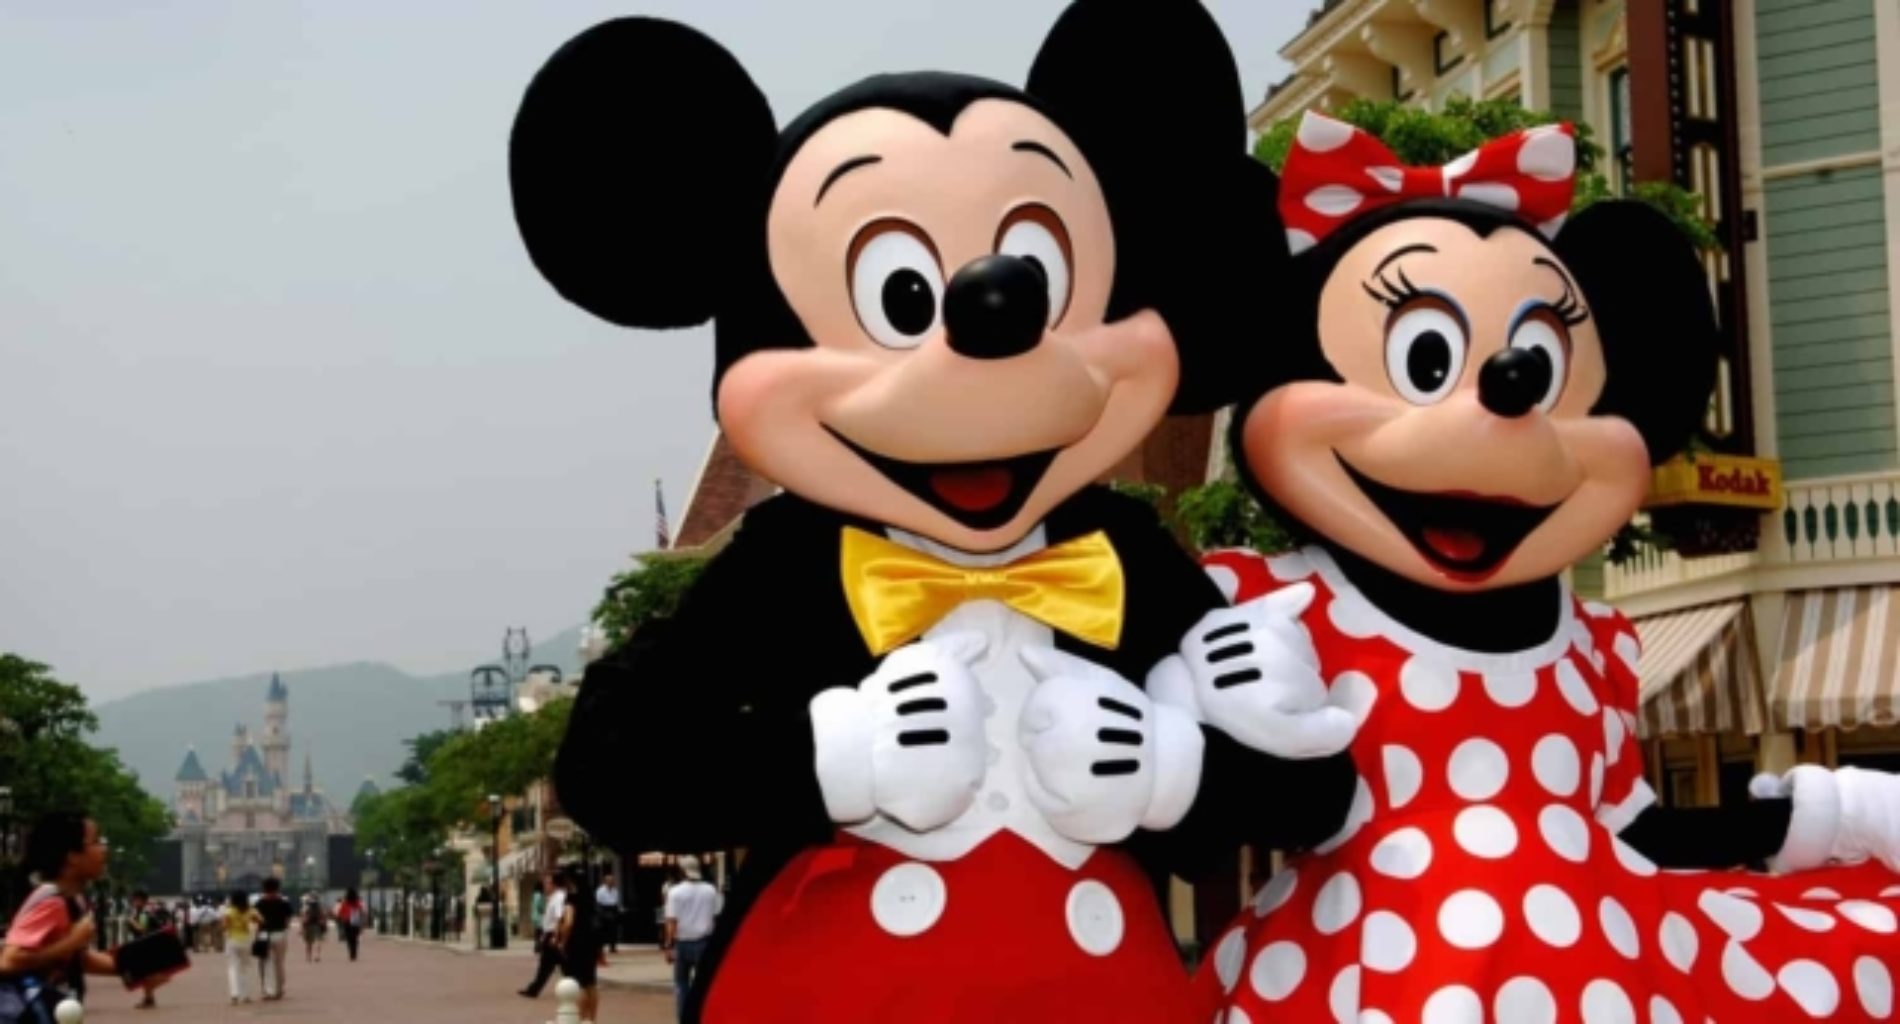 Anti-LGBT group intends to make their own films because Disney is overrun by gays